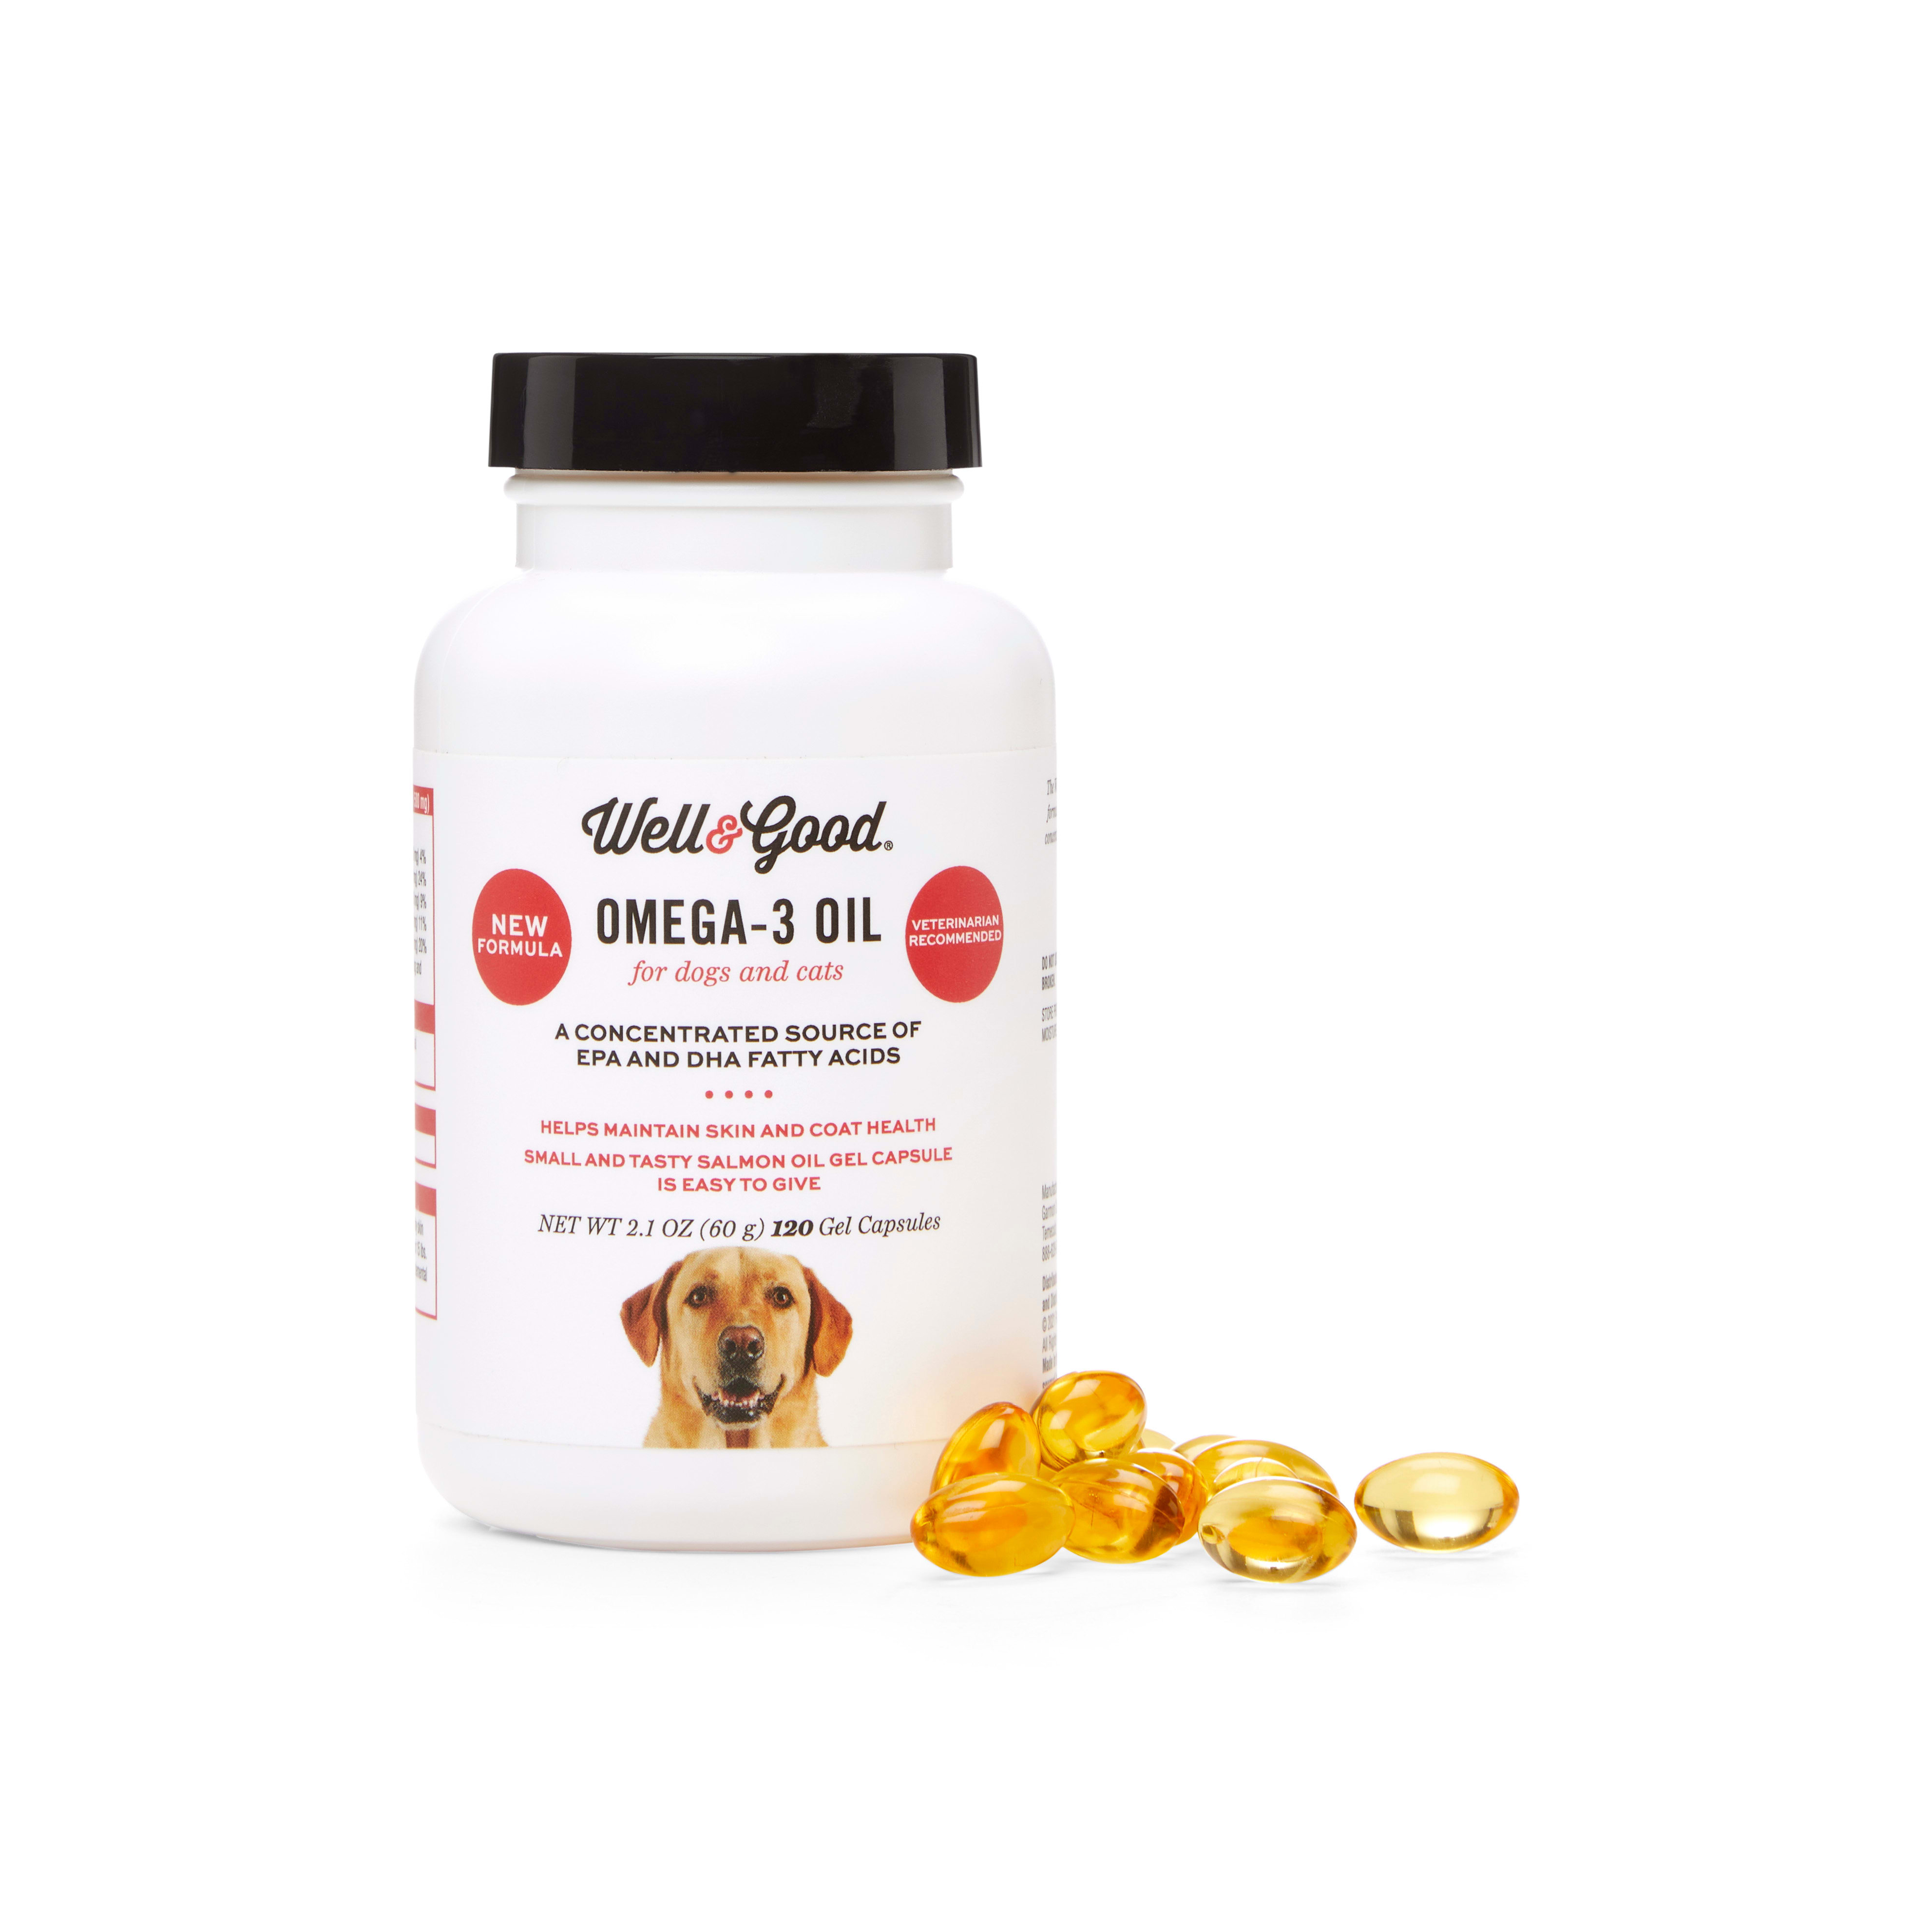 Fish Oil for Dogs: Fish Oil Supplements for Dogs | Petco